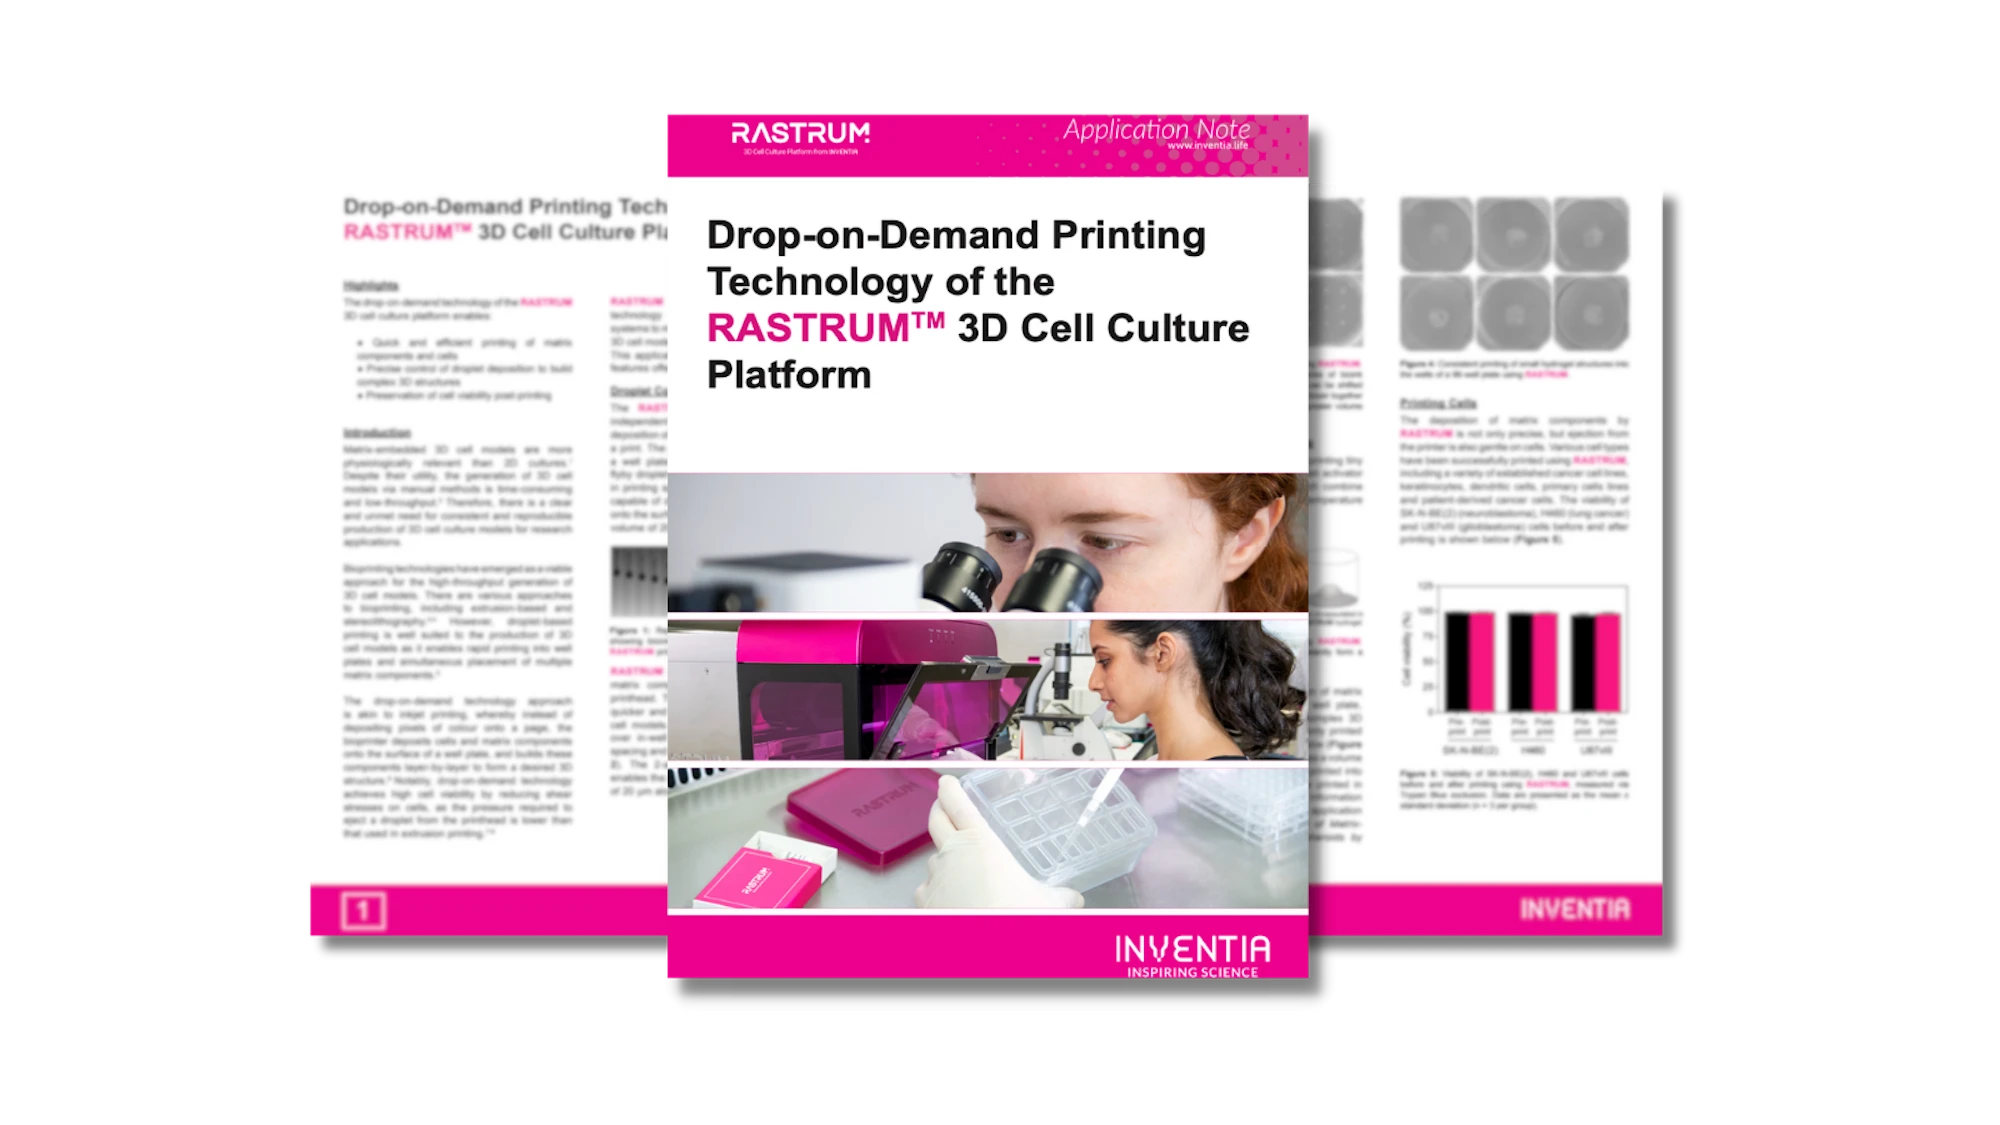 Drop-on-demand printing technology of the RASTRUM™ 3D cell culture platform